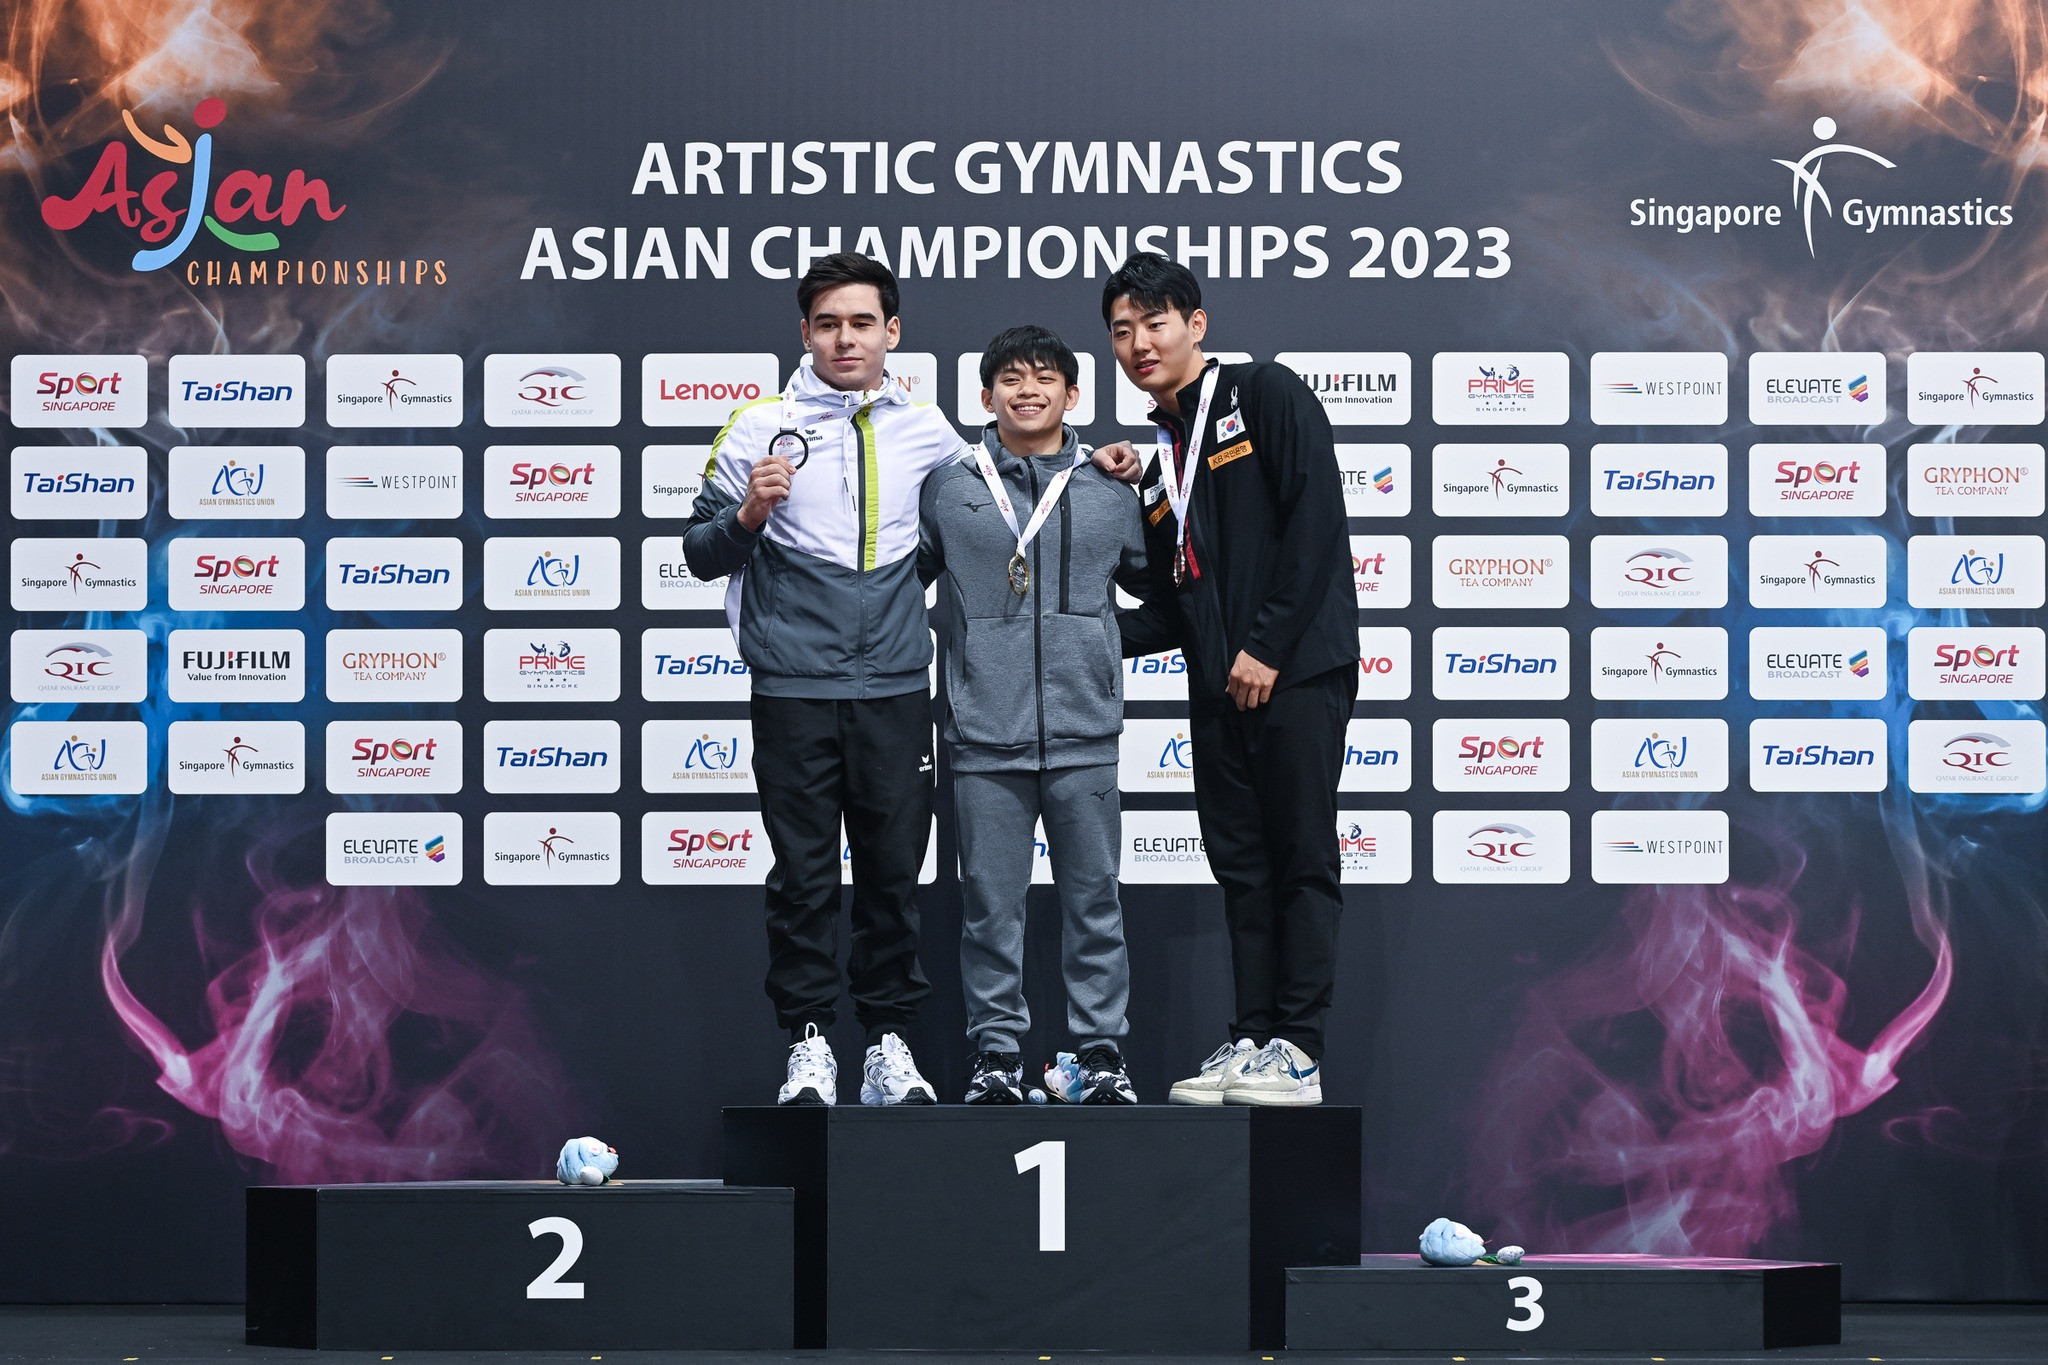 Carlos Yulo, centre, claimed three titles in total at the Asian Artistic Gymnastics Championships ©Singapore Gymnastics